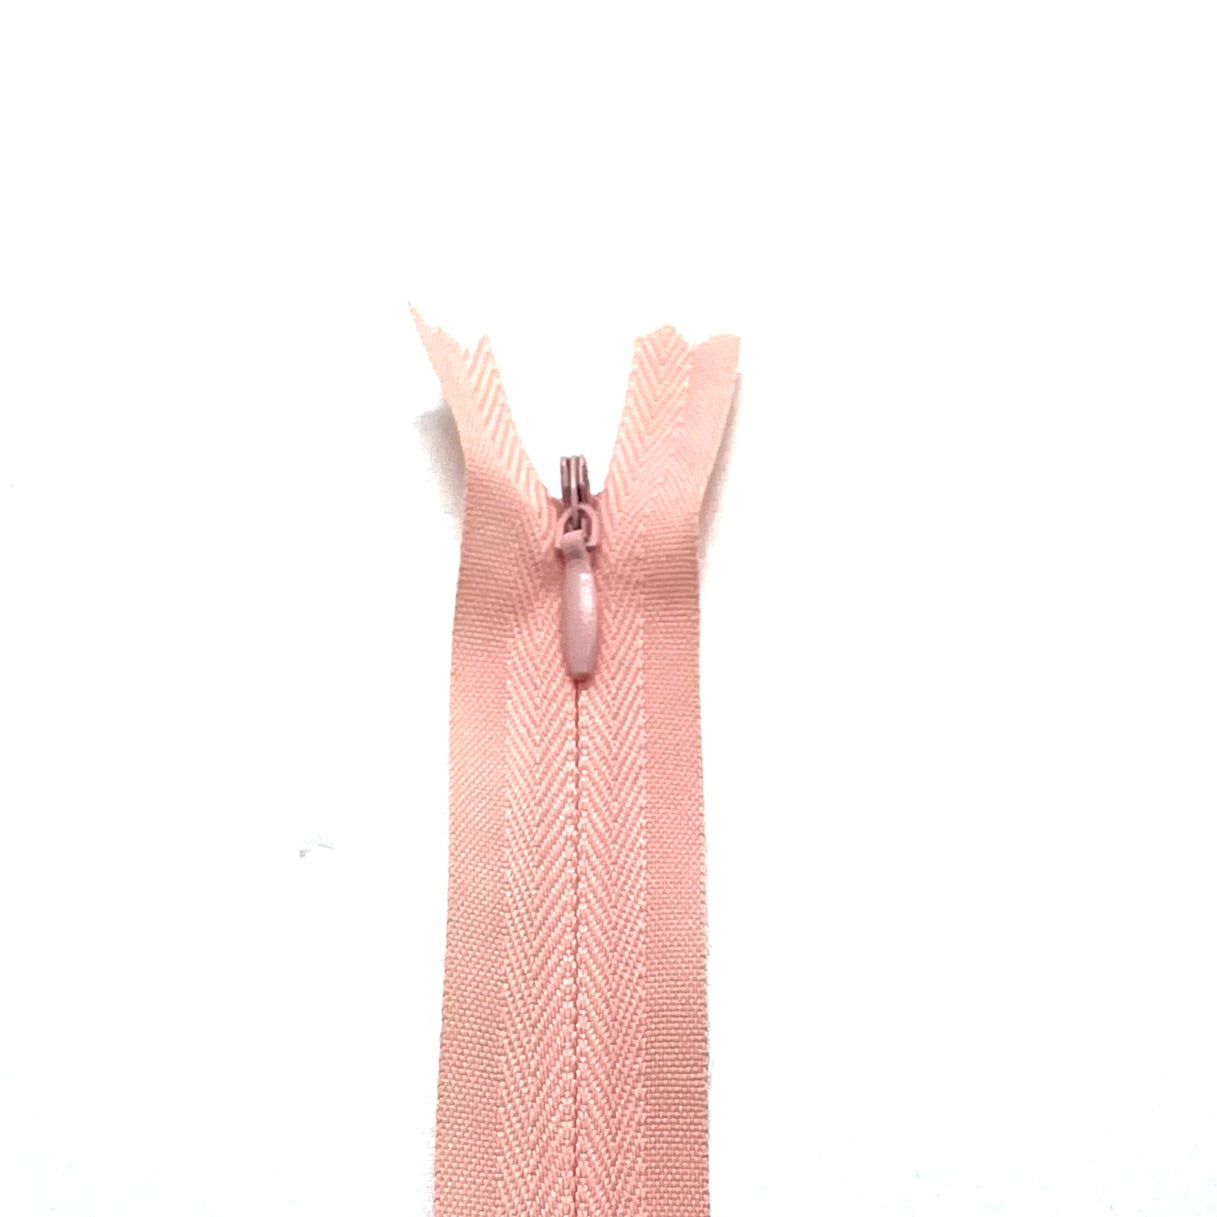 Photo of coral invisible or concealed zips available in many different colours and sizes. Great for achieving a professional finish in your products. Invisible zippers are perfect for dressmaking, cushions, crafts, etc., where you don't want your zipper showing. Installing them can be tricky without the right foot on your machine; a normal zipper foot is for installing standard zippers, while you will need an invisible zipper foot for a professional result